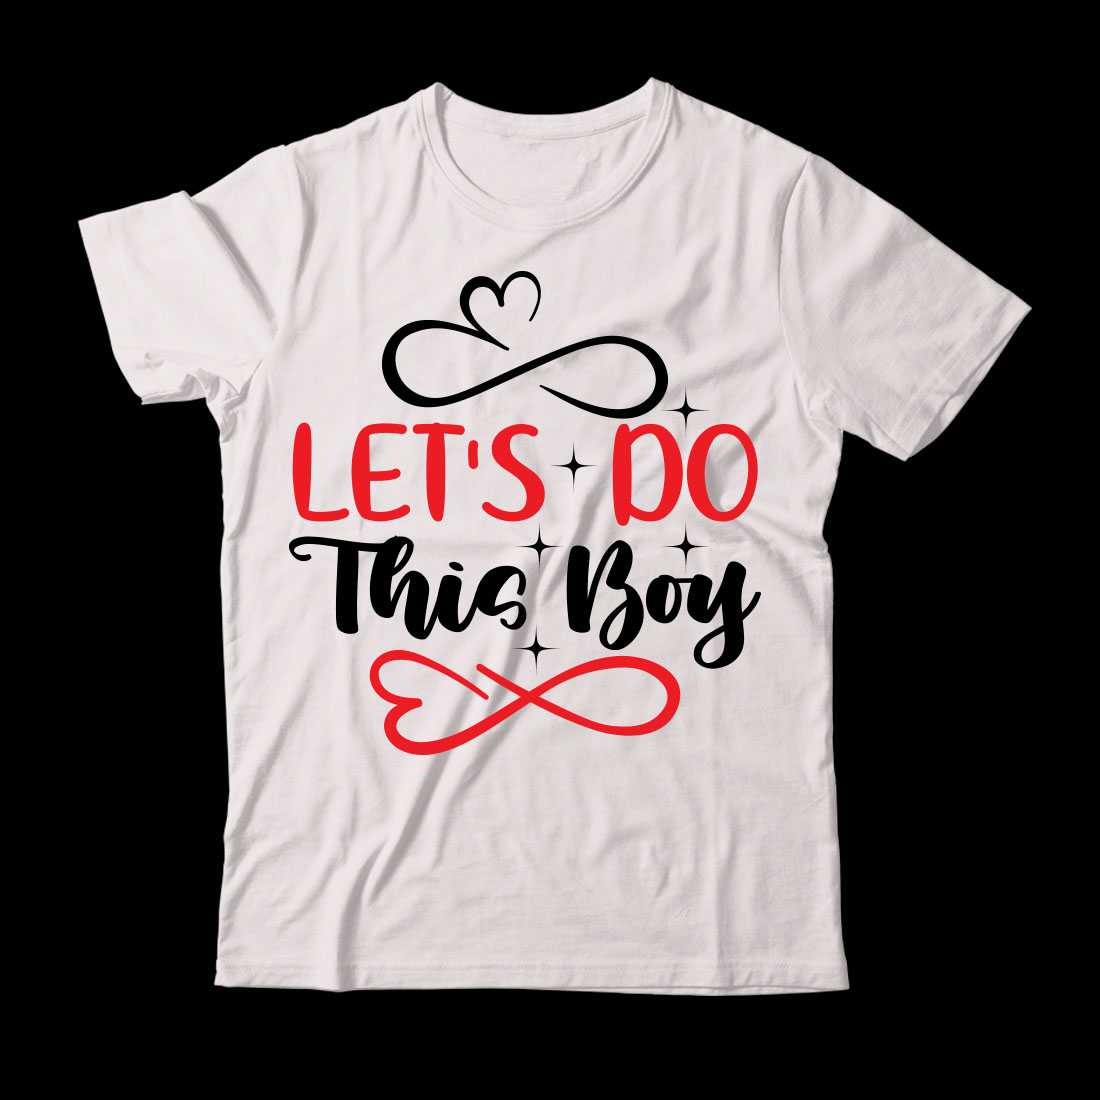 T - shirt that says let's do this boy.